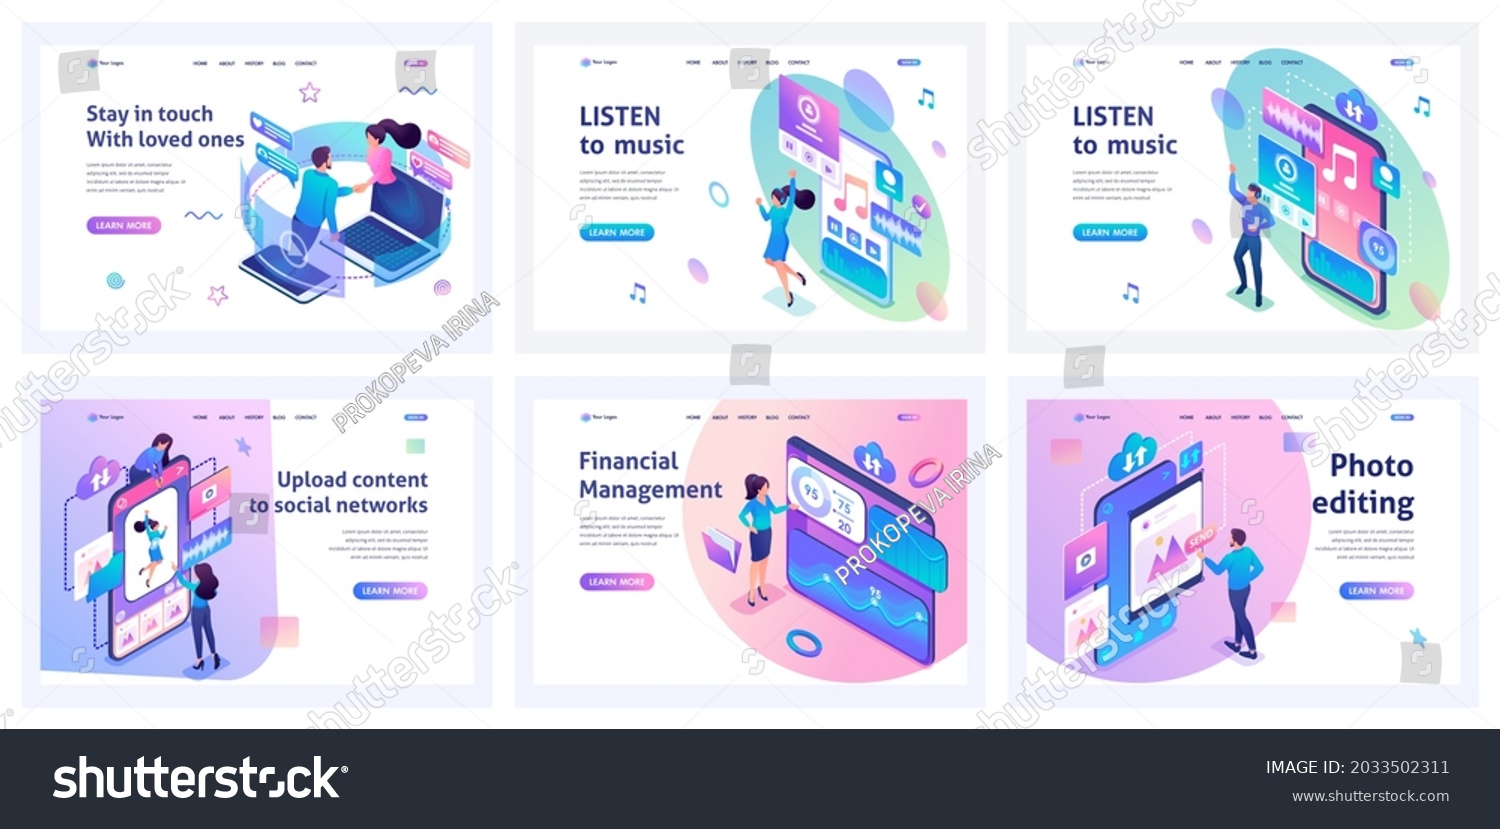 SVG of Collection of landing pages. Men and women communicate online, create social networks, listen to music, process photos. Mobile apps. Isometric characters. svg